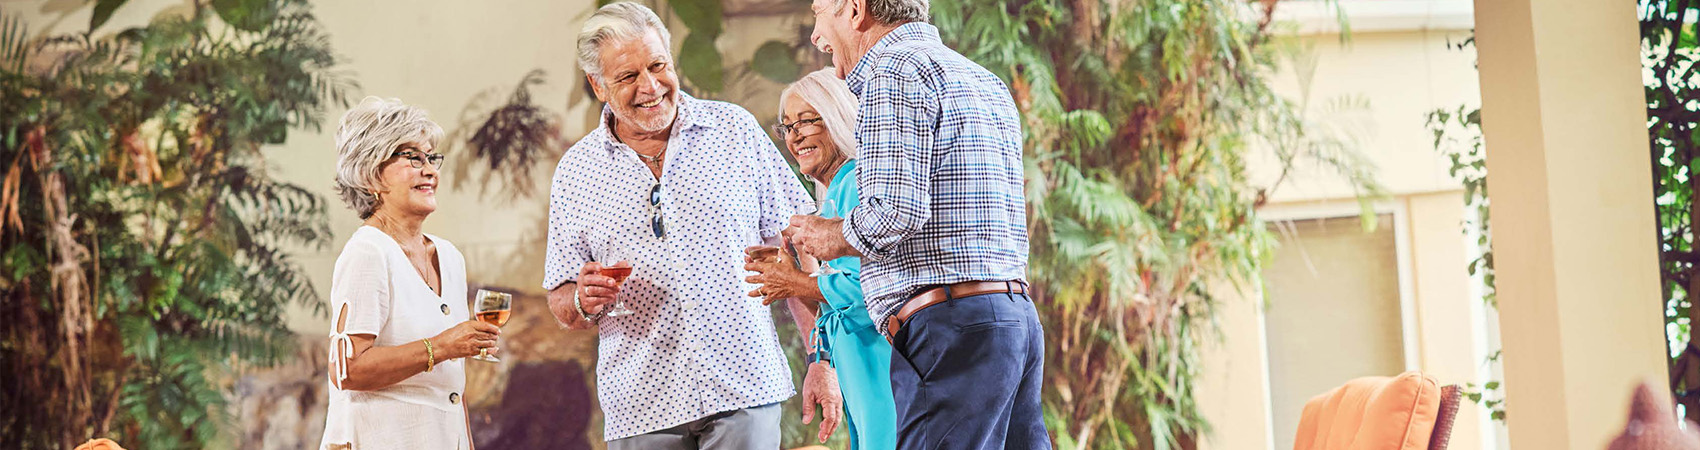 Why Now is the Perfect Time to Look Into a Senior Living Community